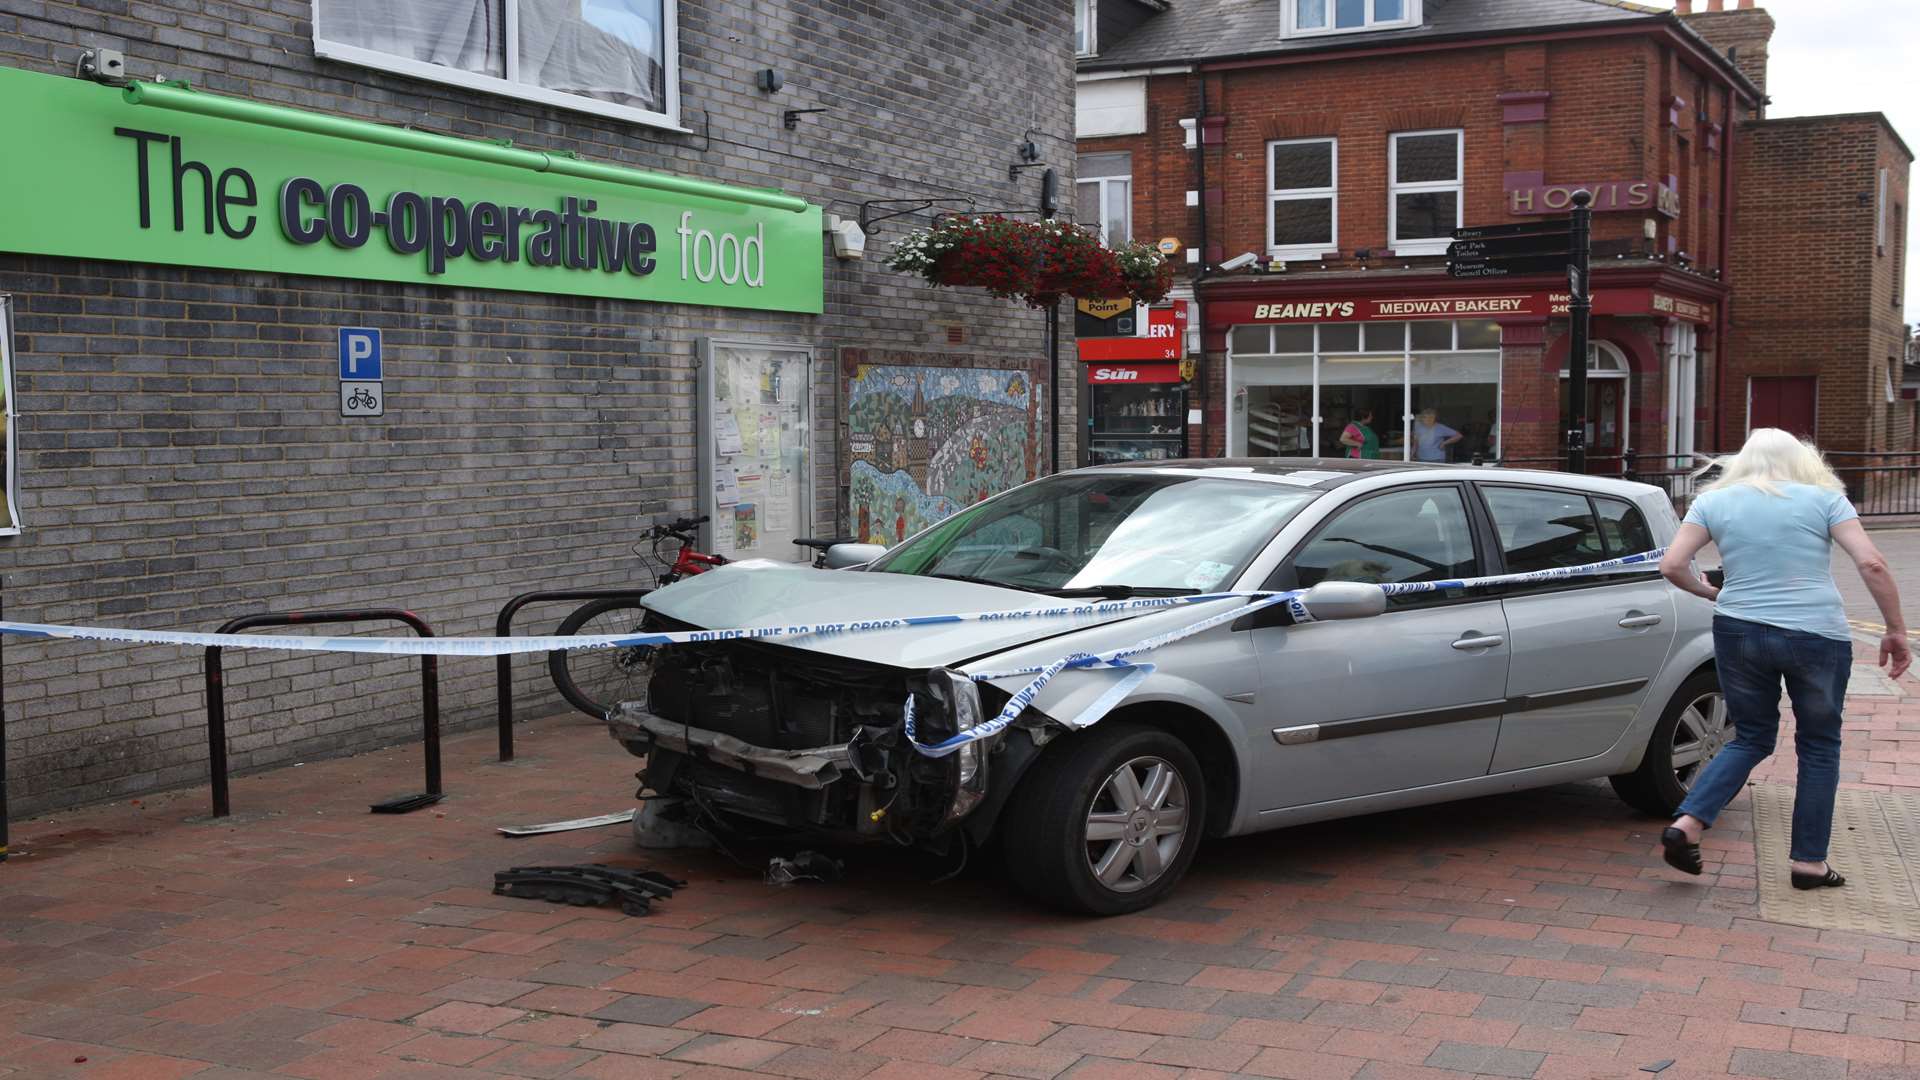 Three people were injured when two cars collided in Snodland. Picture: John Westhrop